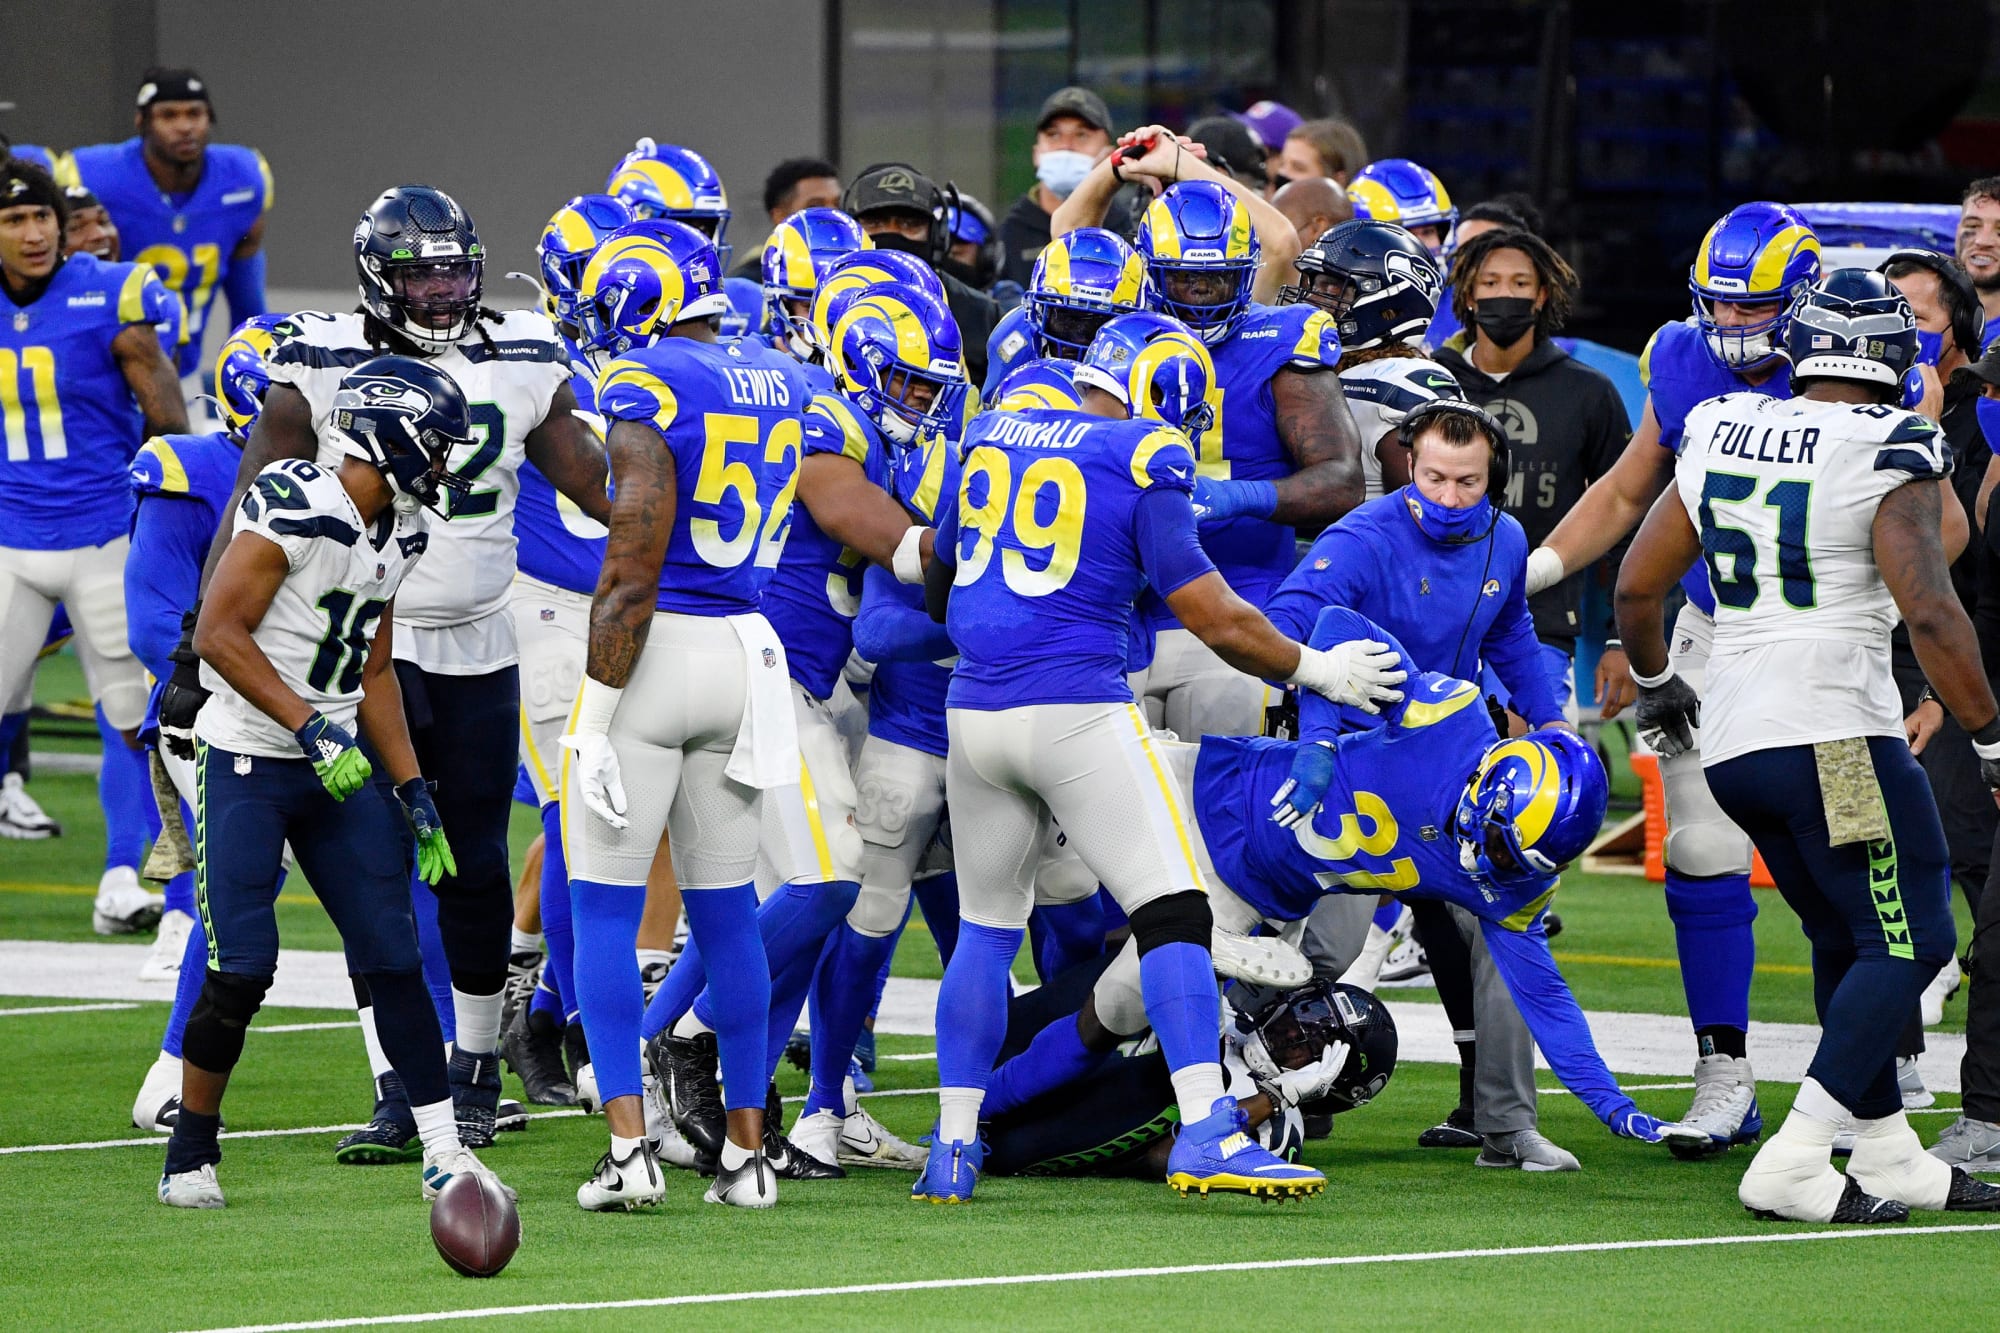 LA Rams defense appears to be ready for the NFL playoffs.